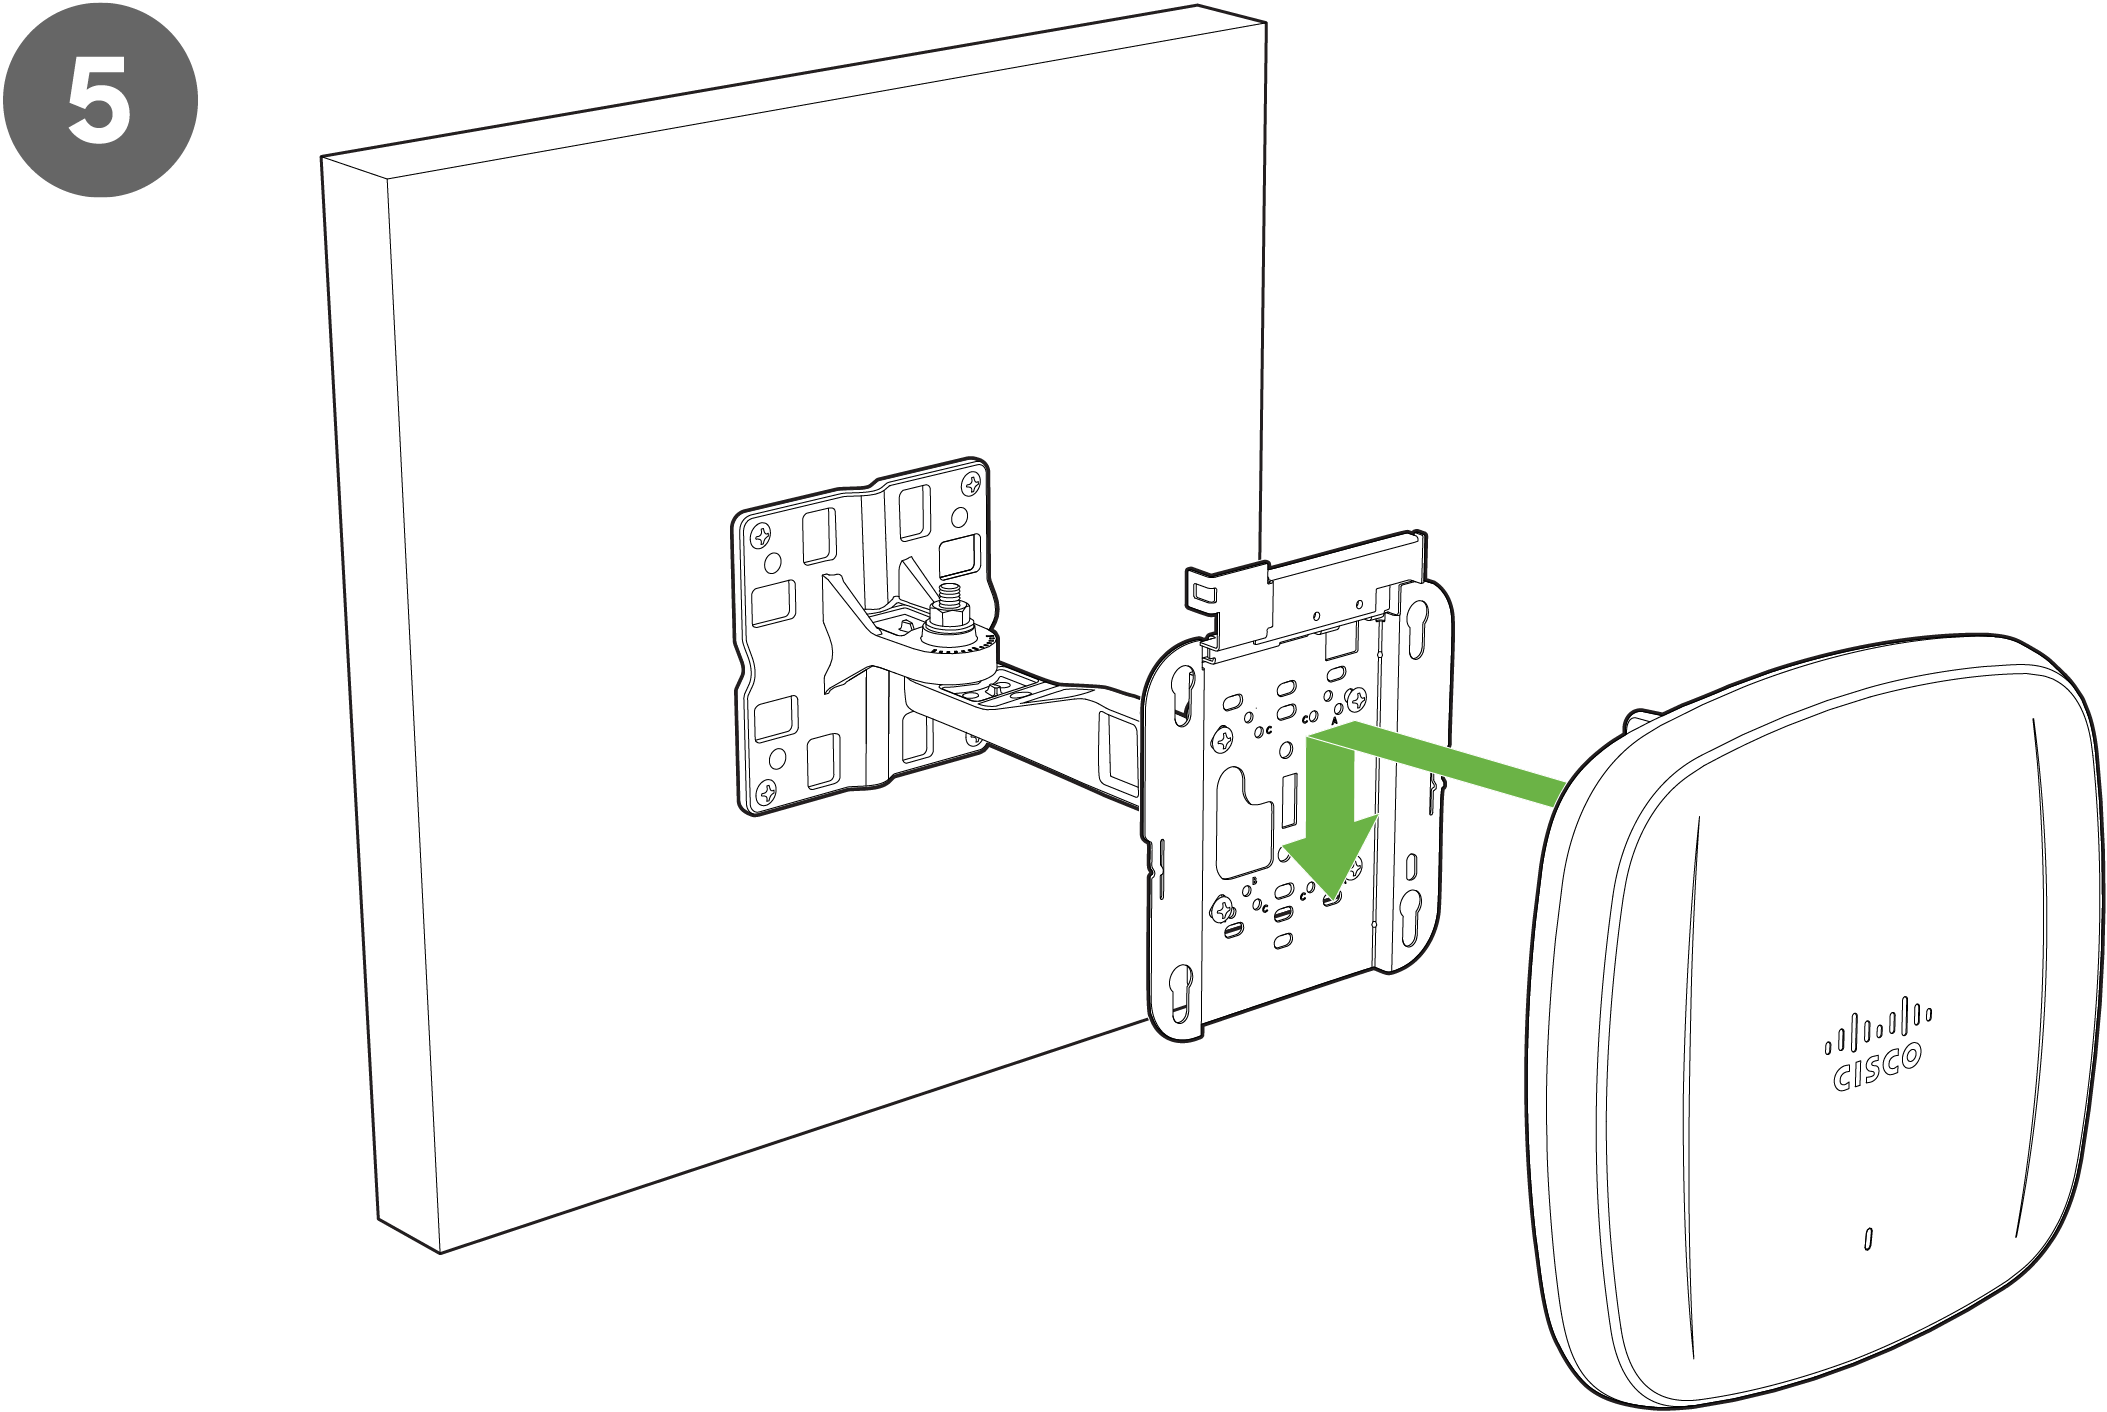 Image showing attachment of the access point to the AIR-AP-BRACKET-2 with use of a 13 mm wrench